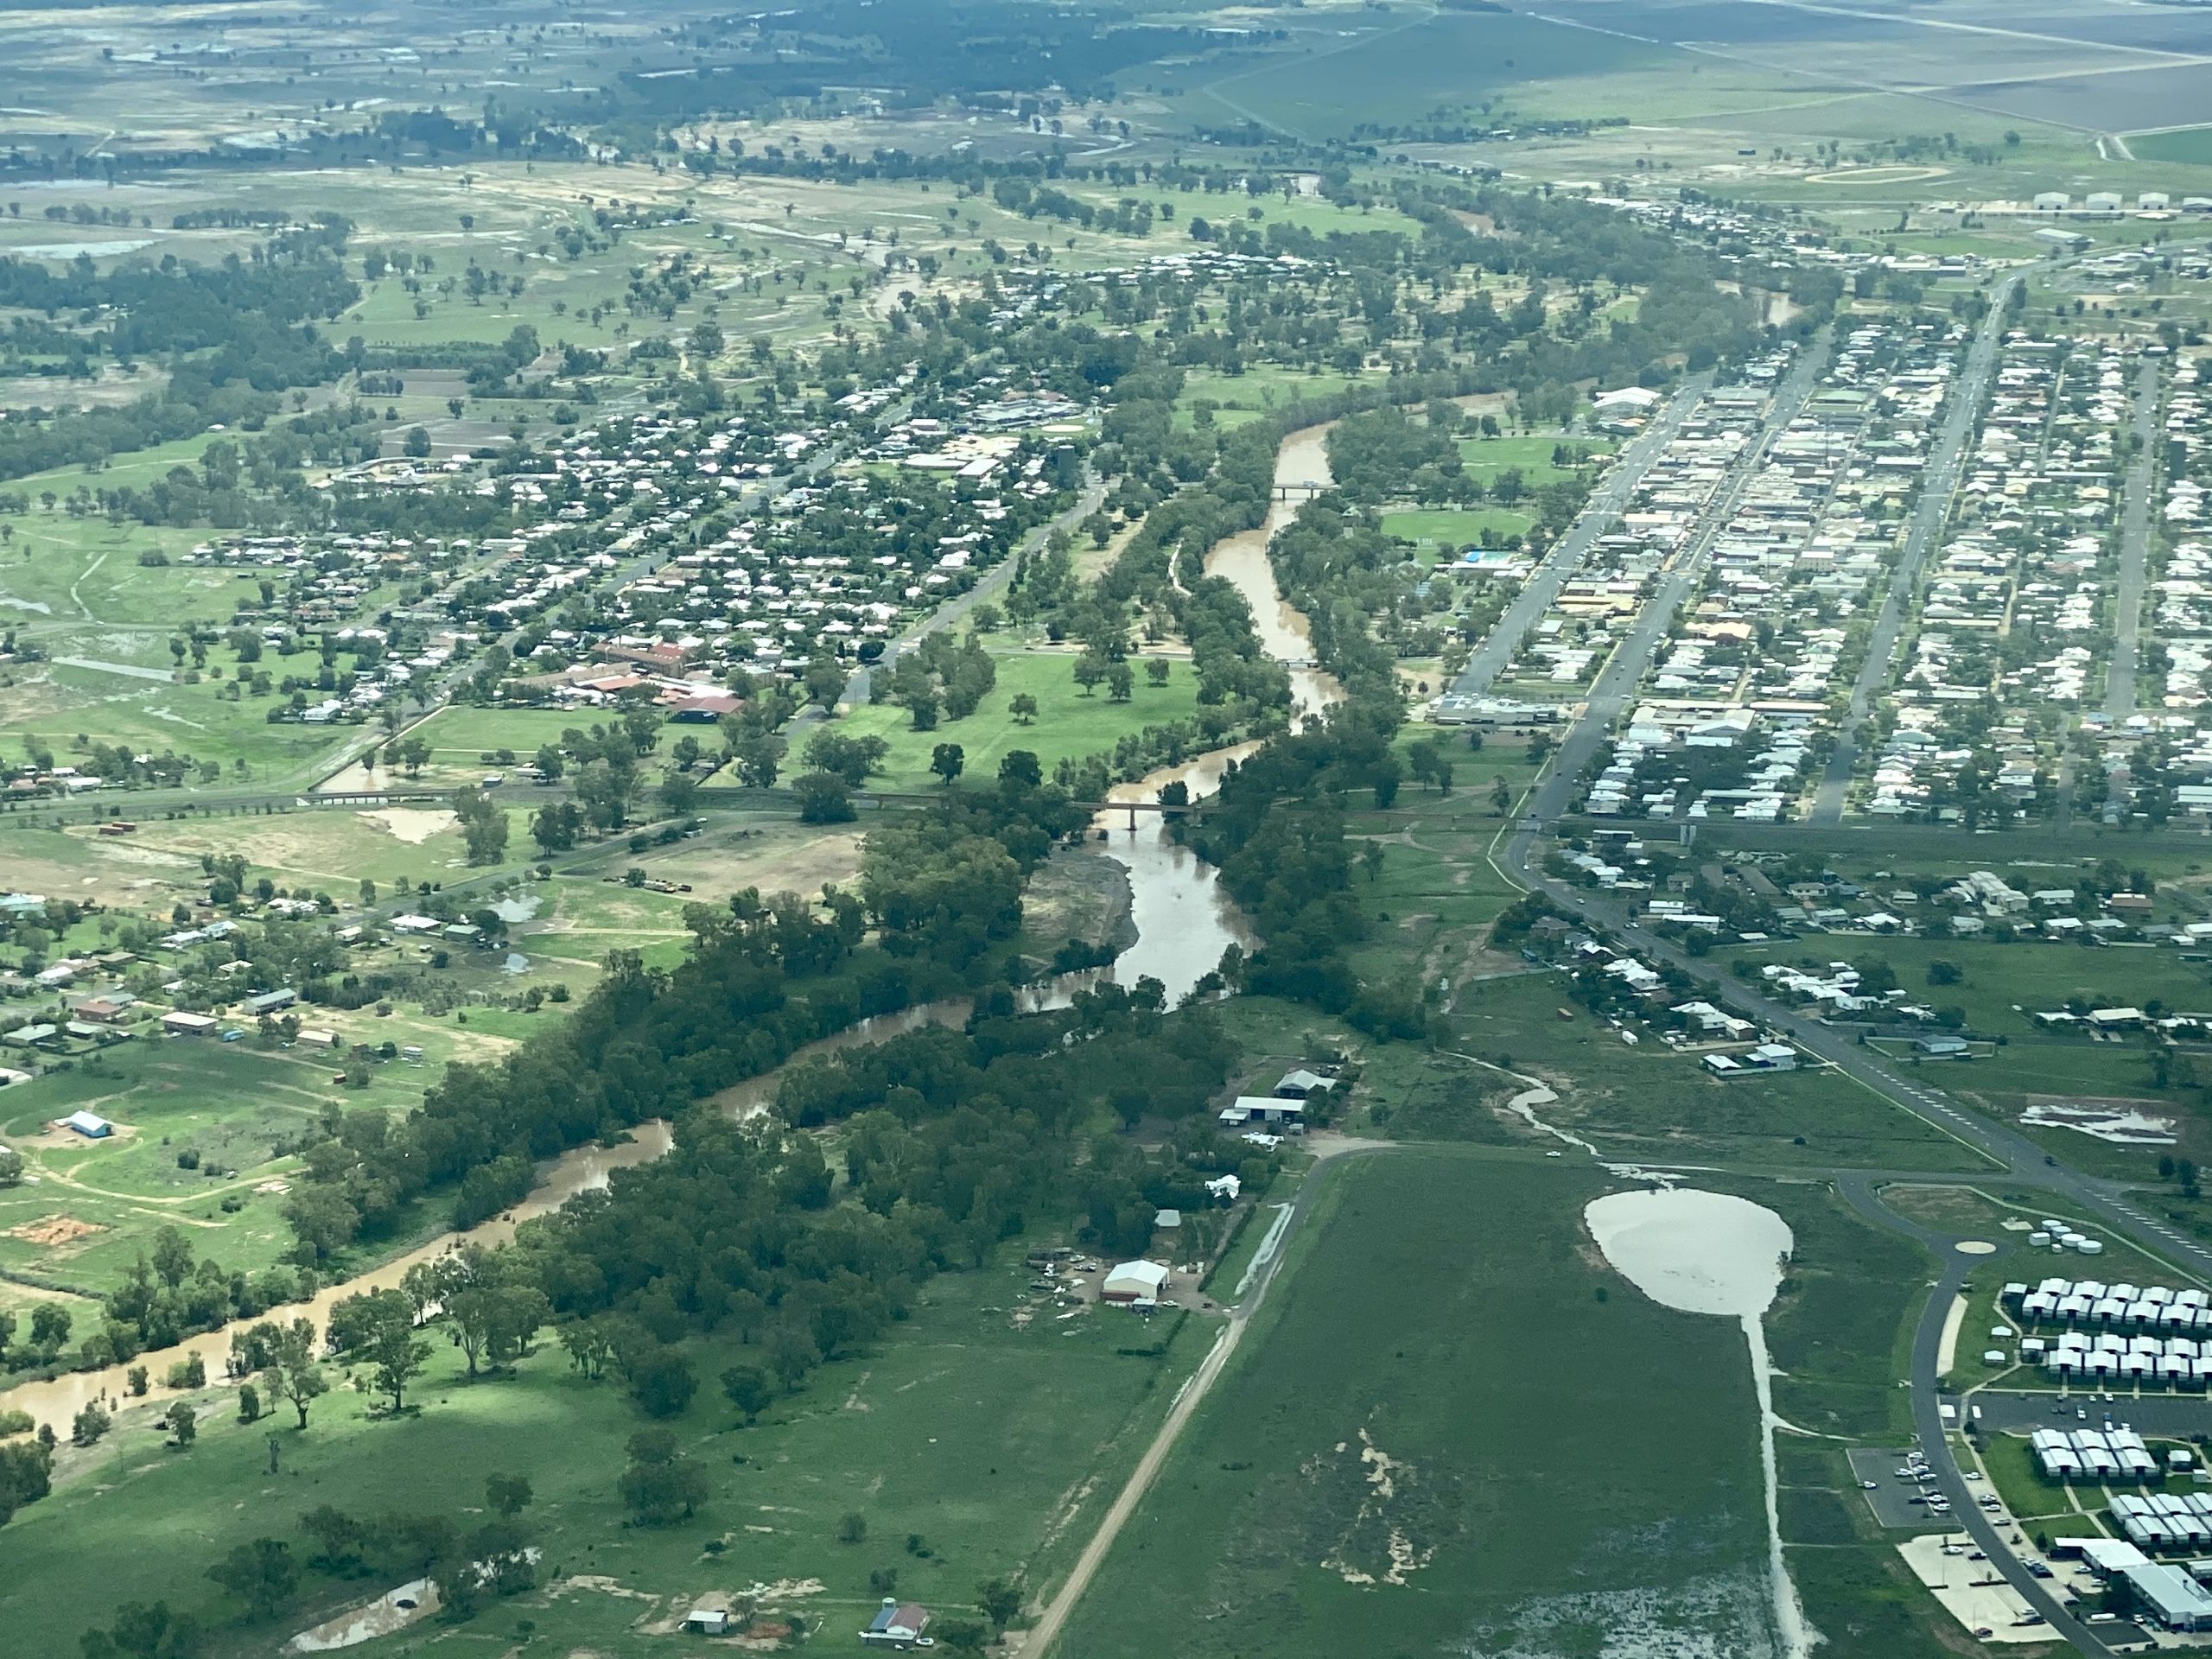 A very green Narrabri, the photo was taken looking north over the flowing Narrabri Creek on Tuesday.